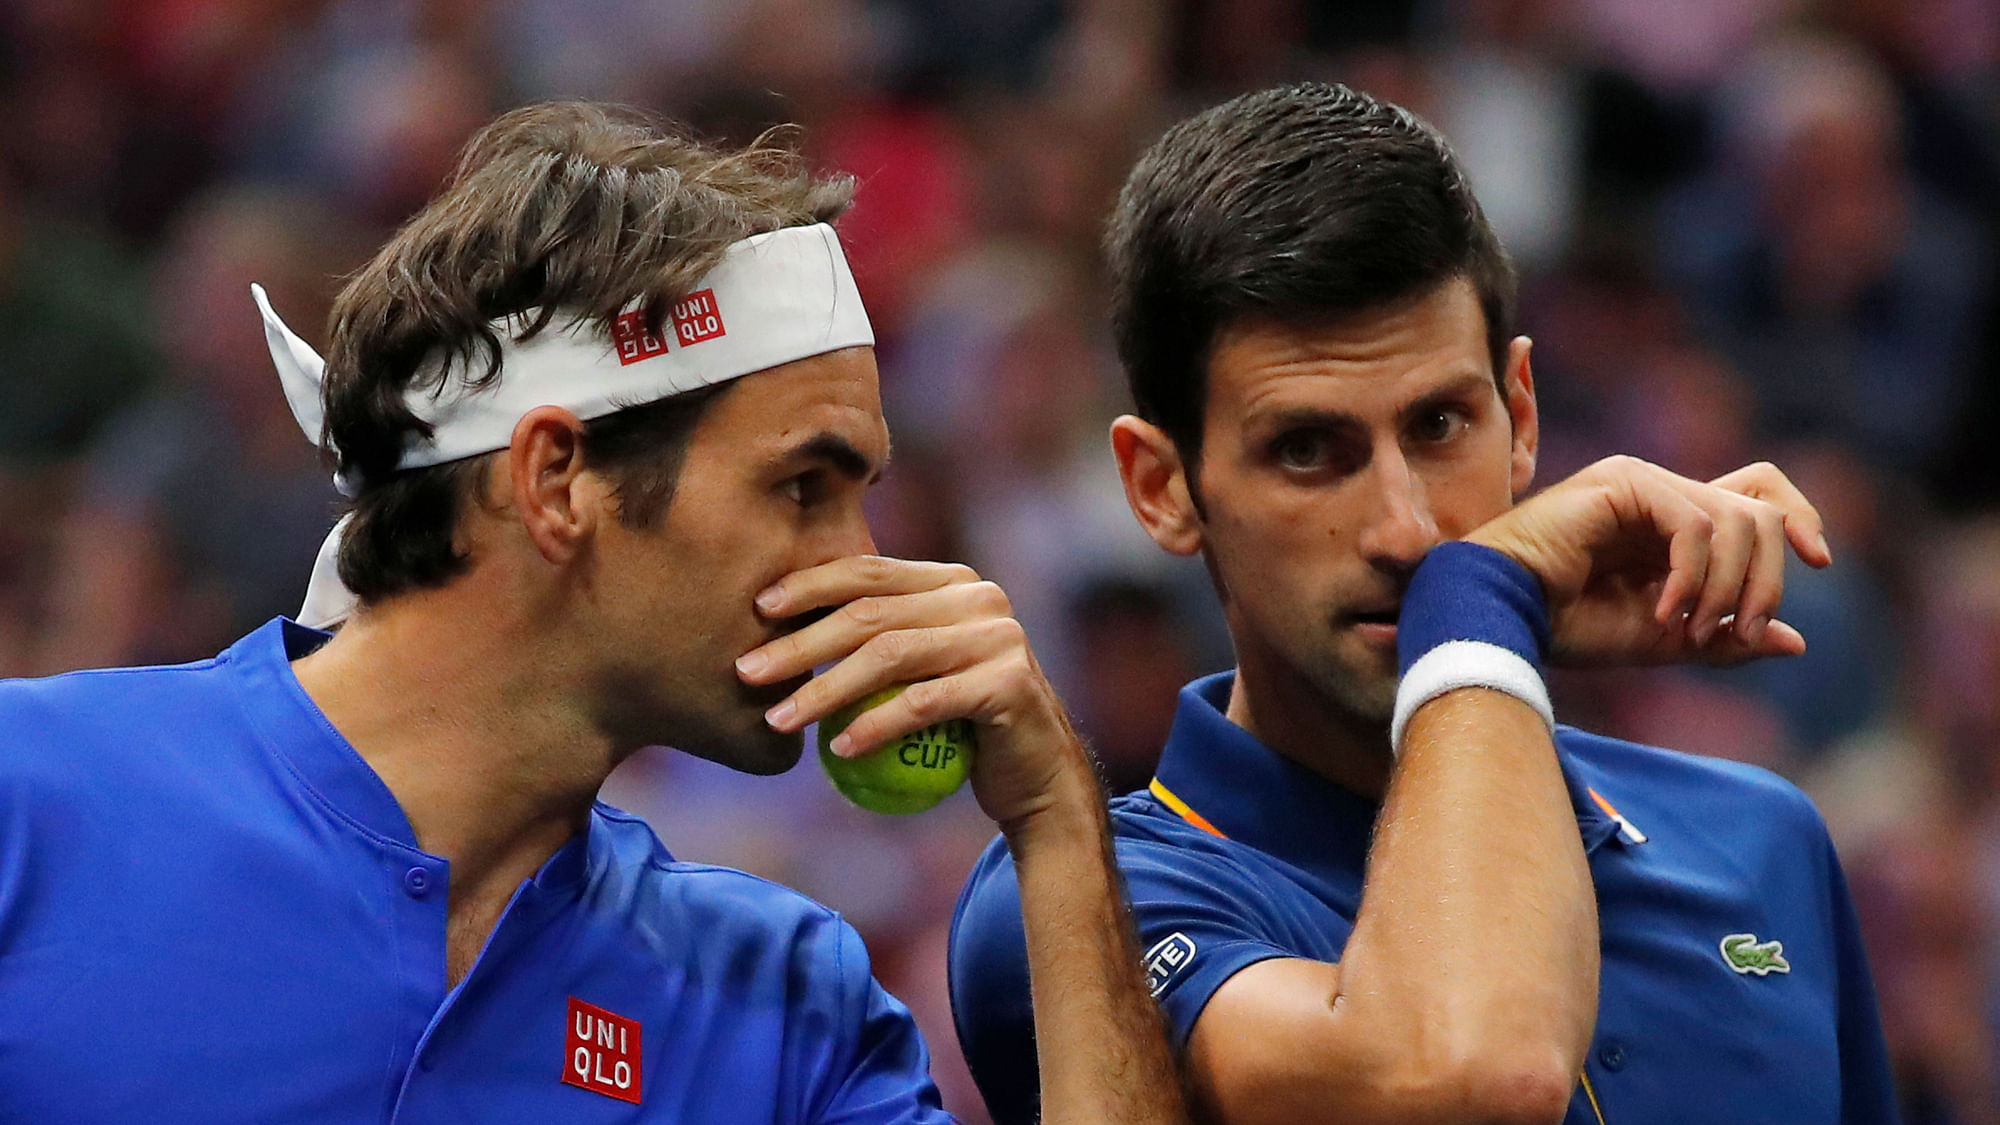 Team Europe’s Roger Federer, left, whispers to Novak Djokovic during a men’s doubles tennis match against Team World’s Jack Sock and Kevin Anderson at the Laver Cup.